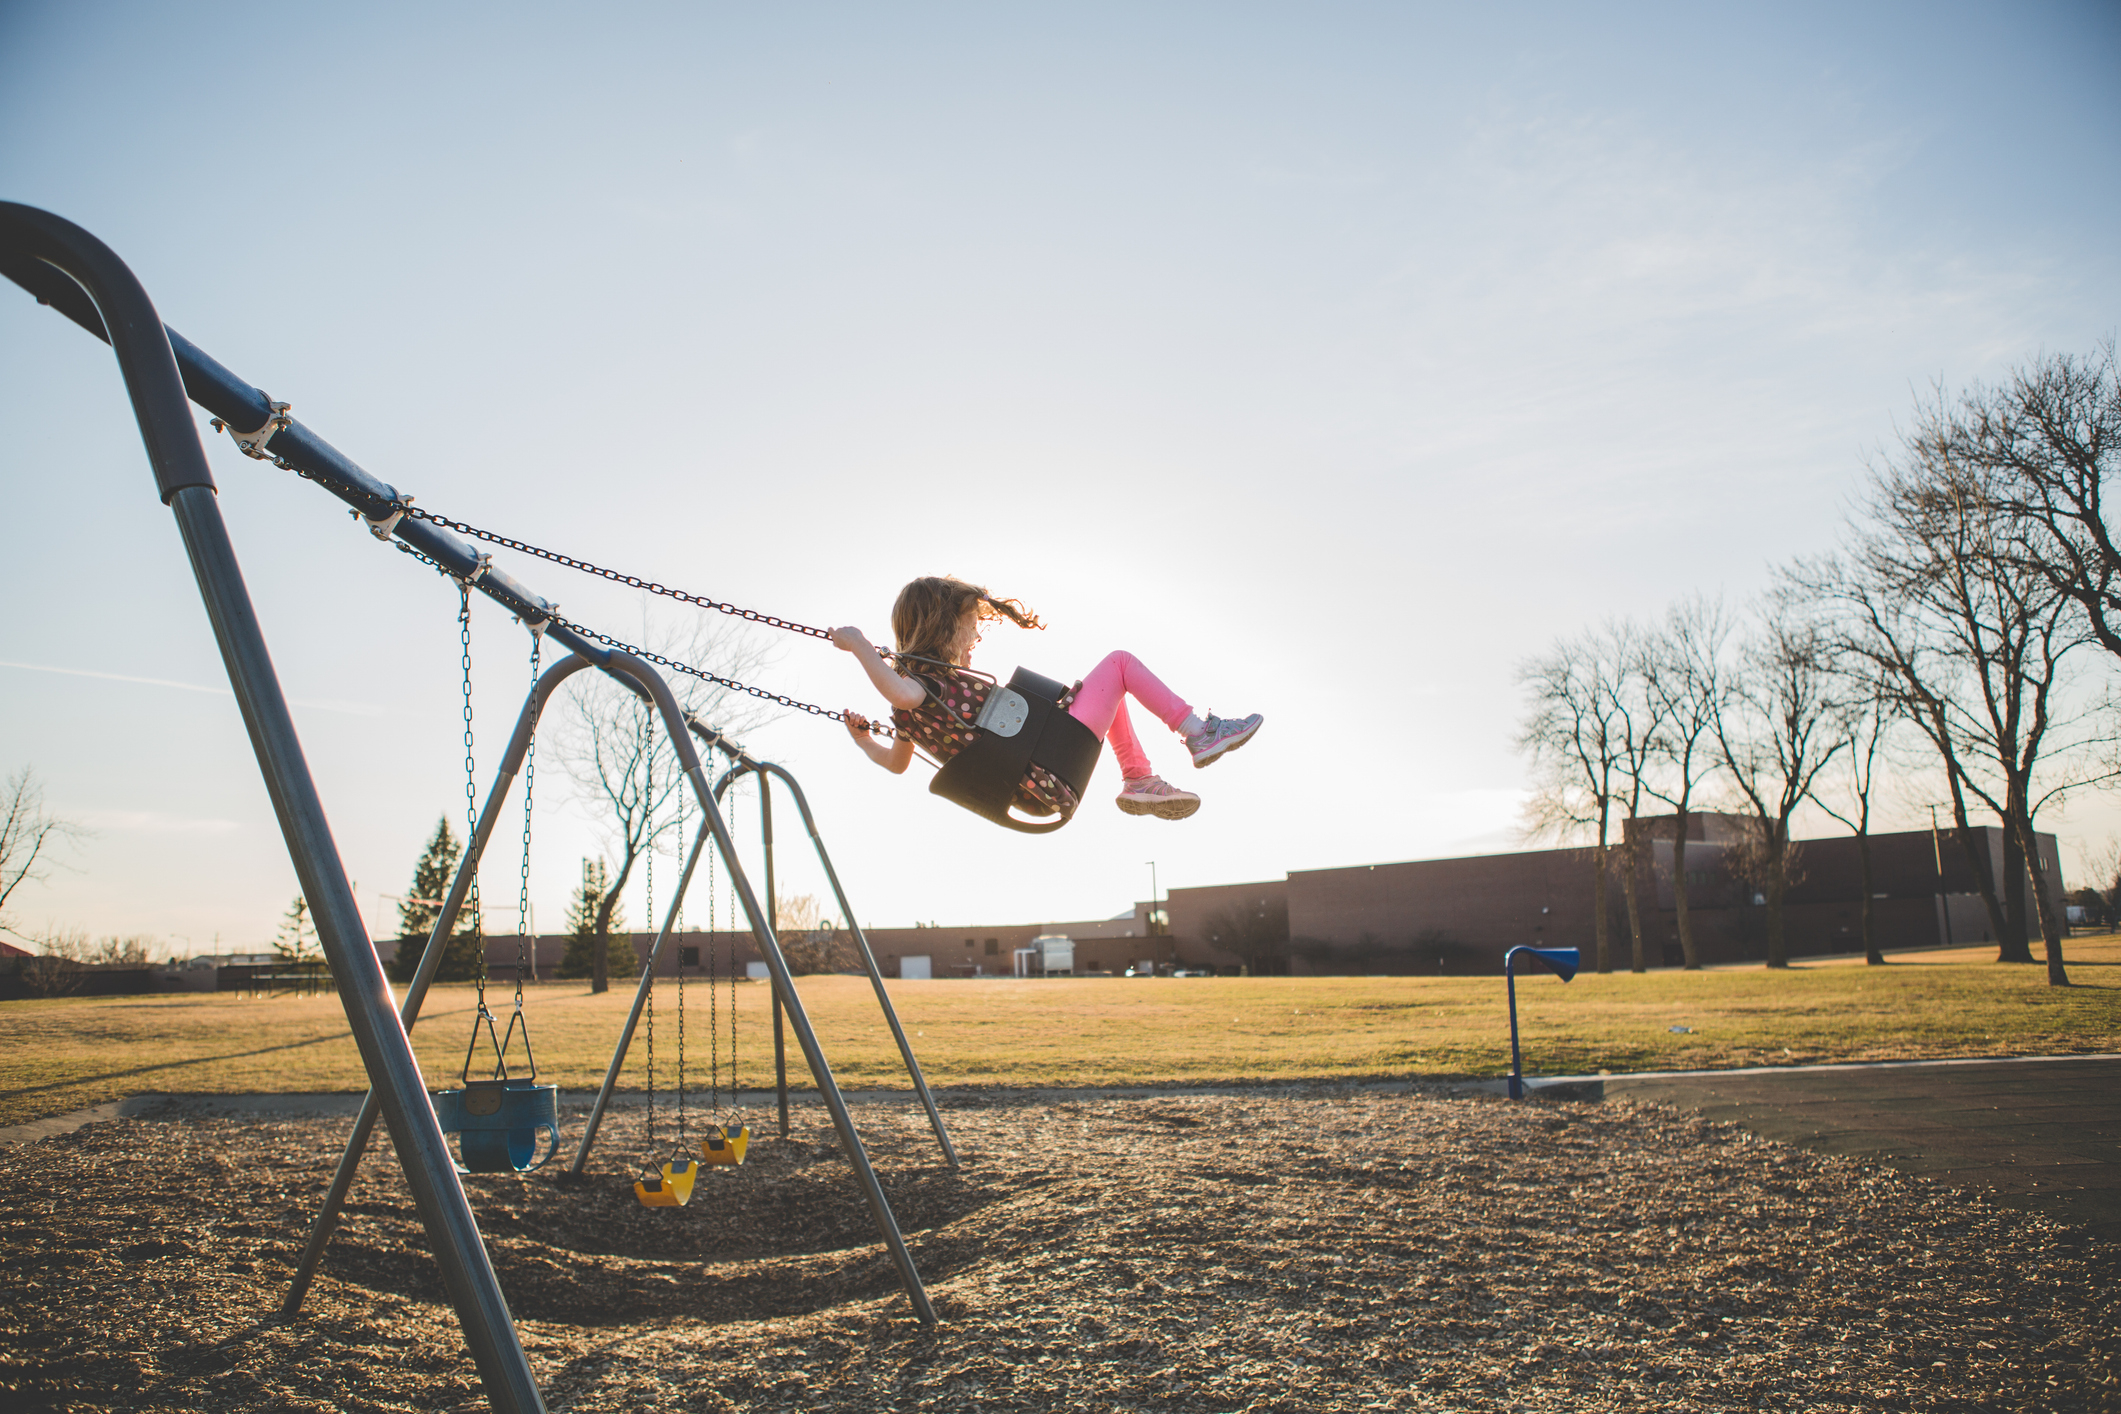 Child swinging on a playground swing set with clear skies in the background